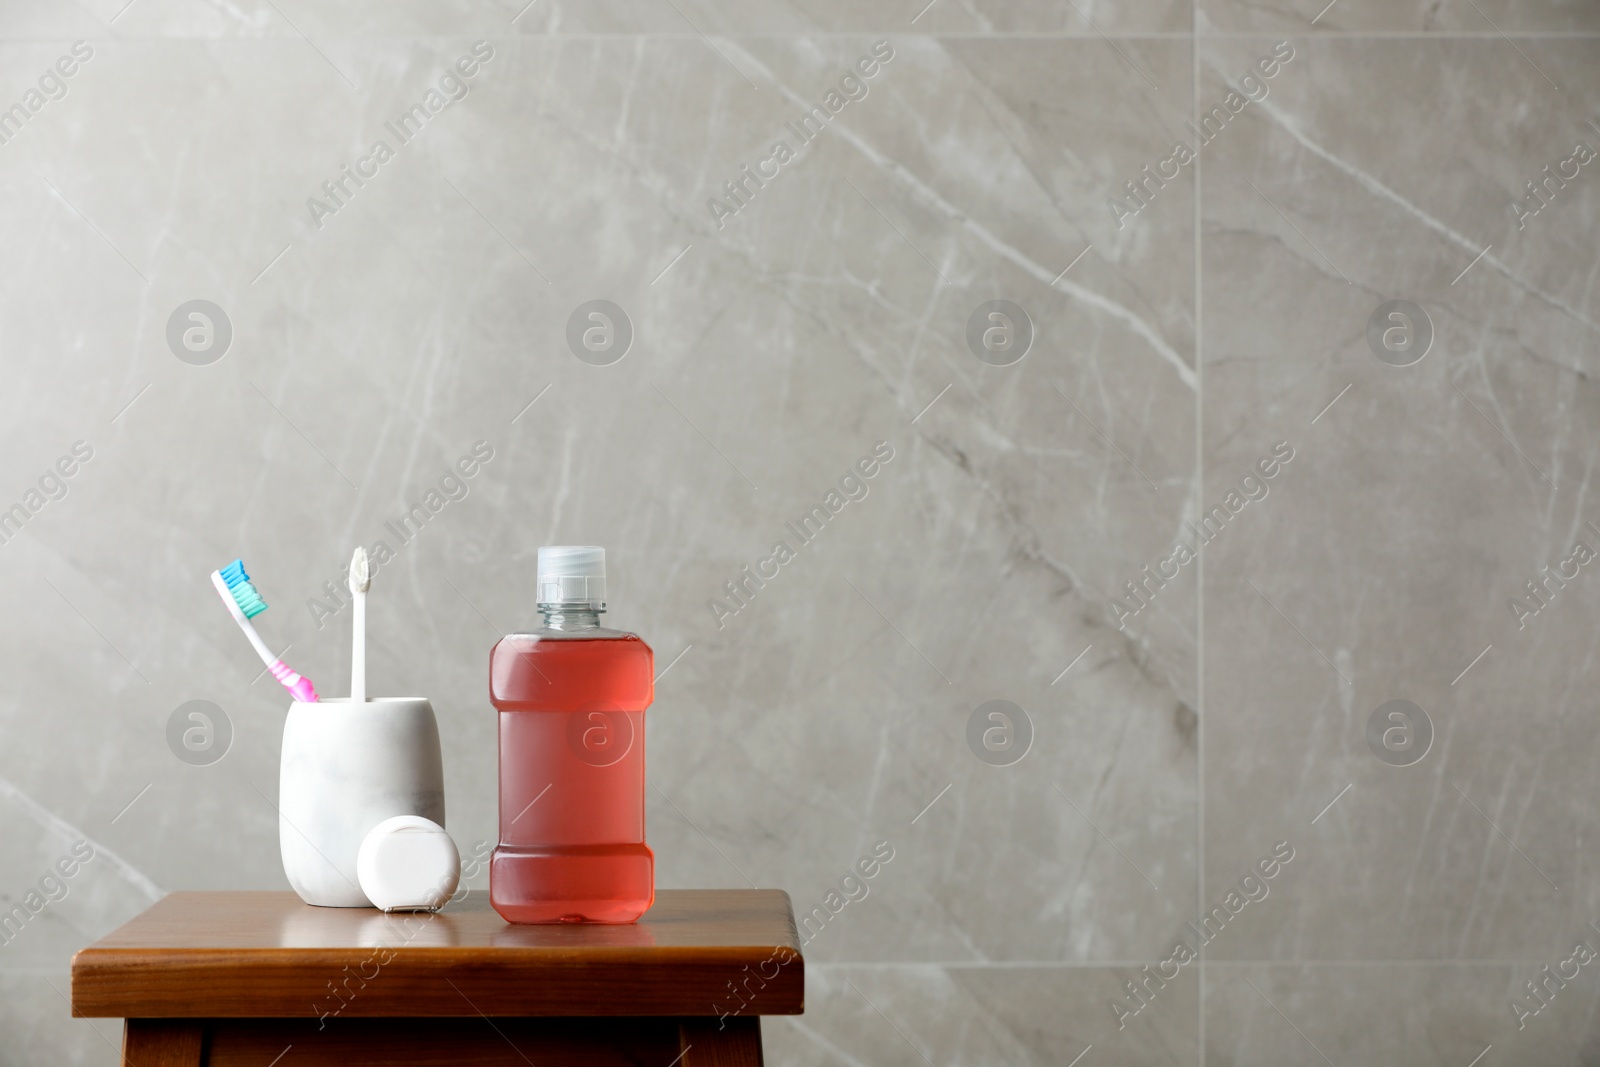 Photo of Bottle of mouthwash, toothbrushes and dental floss on wooden table, space for text